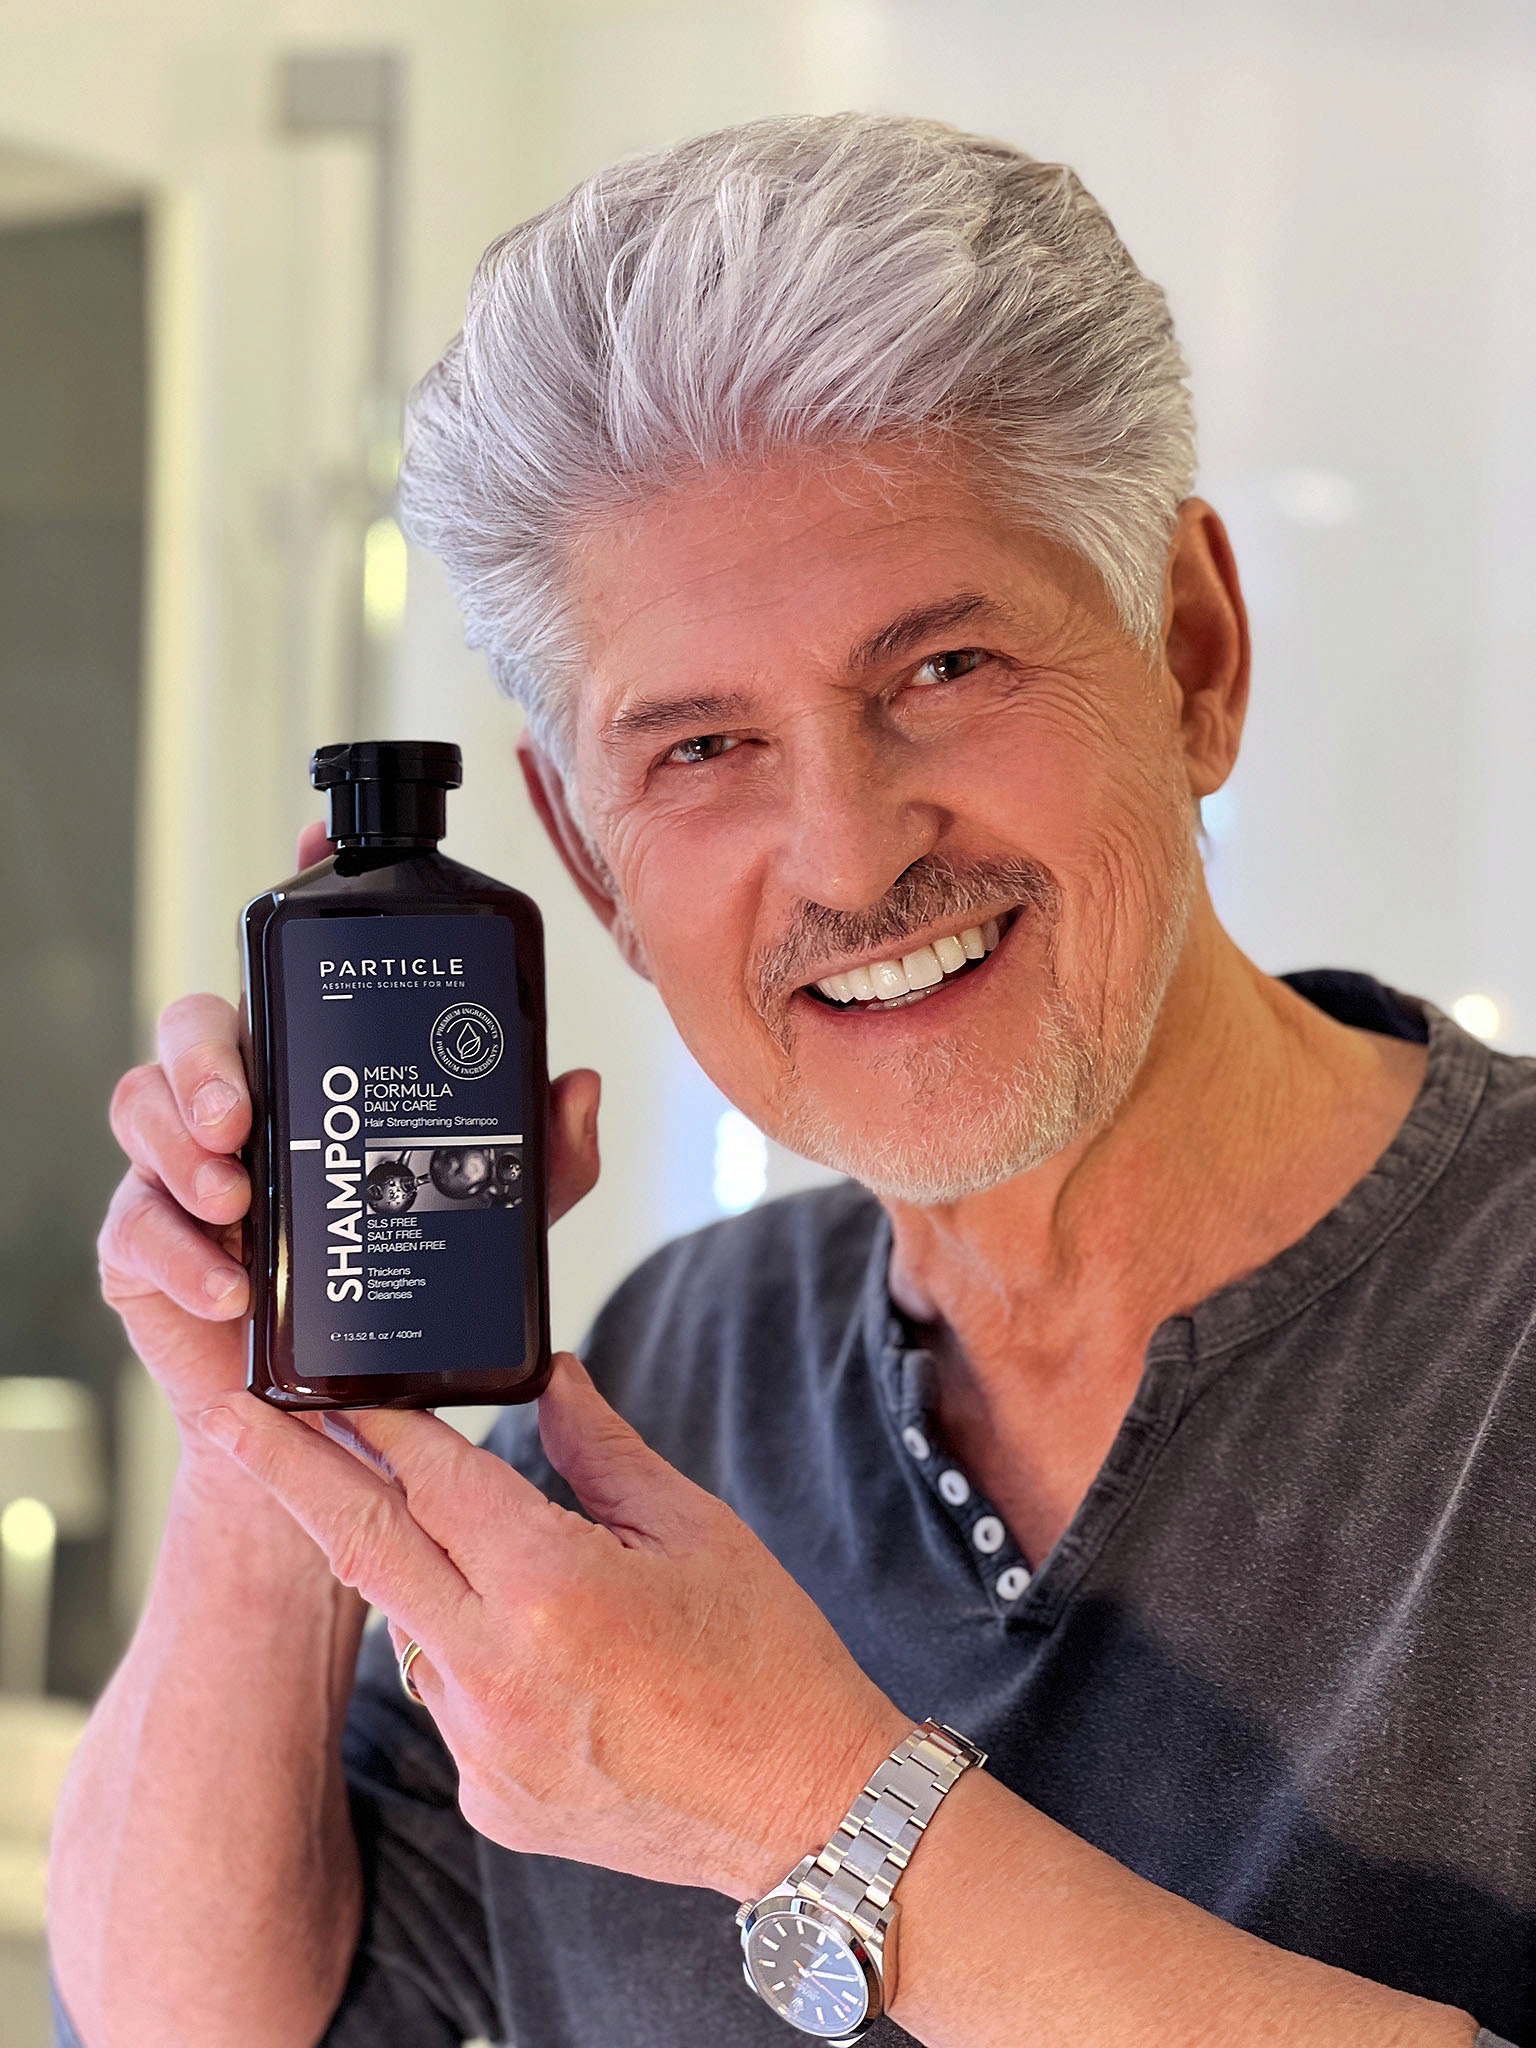 Man smiling and holding Particle Men's Formula Daily Care Strengthening Shampoo bottle.